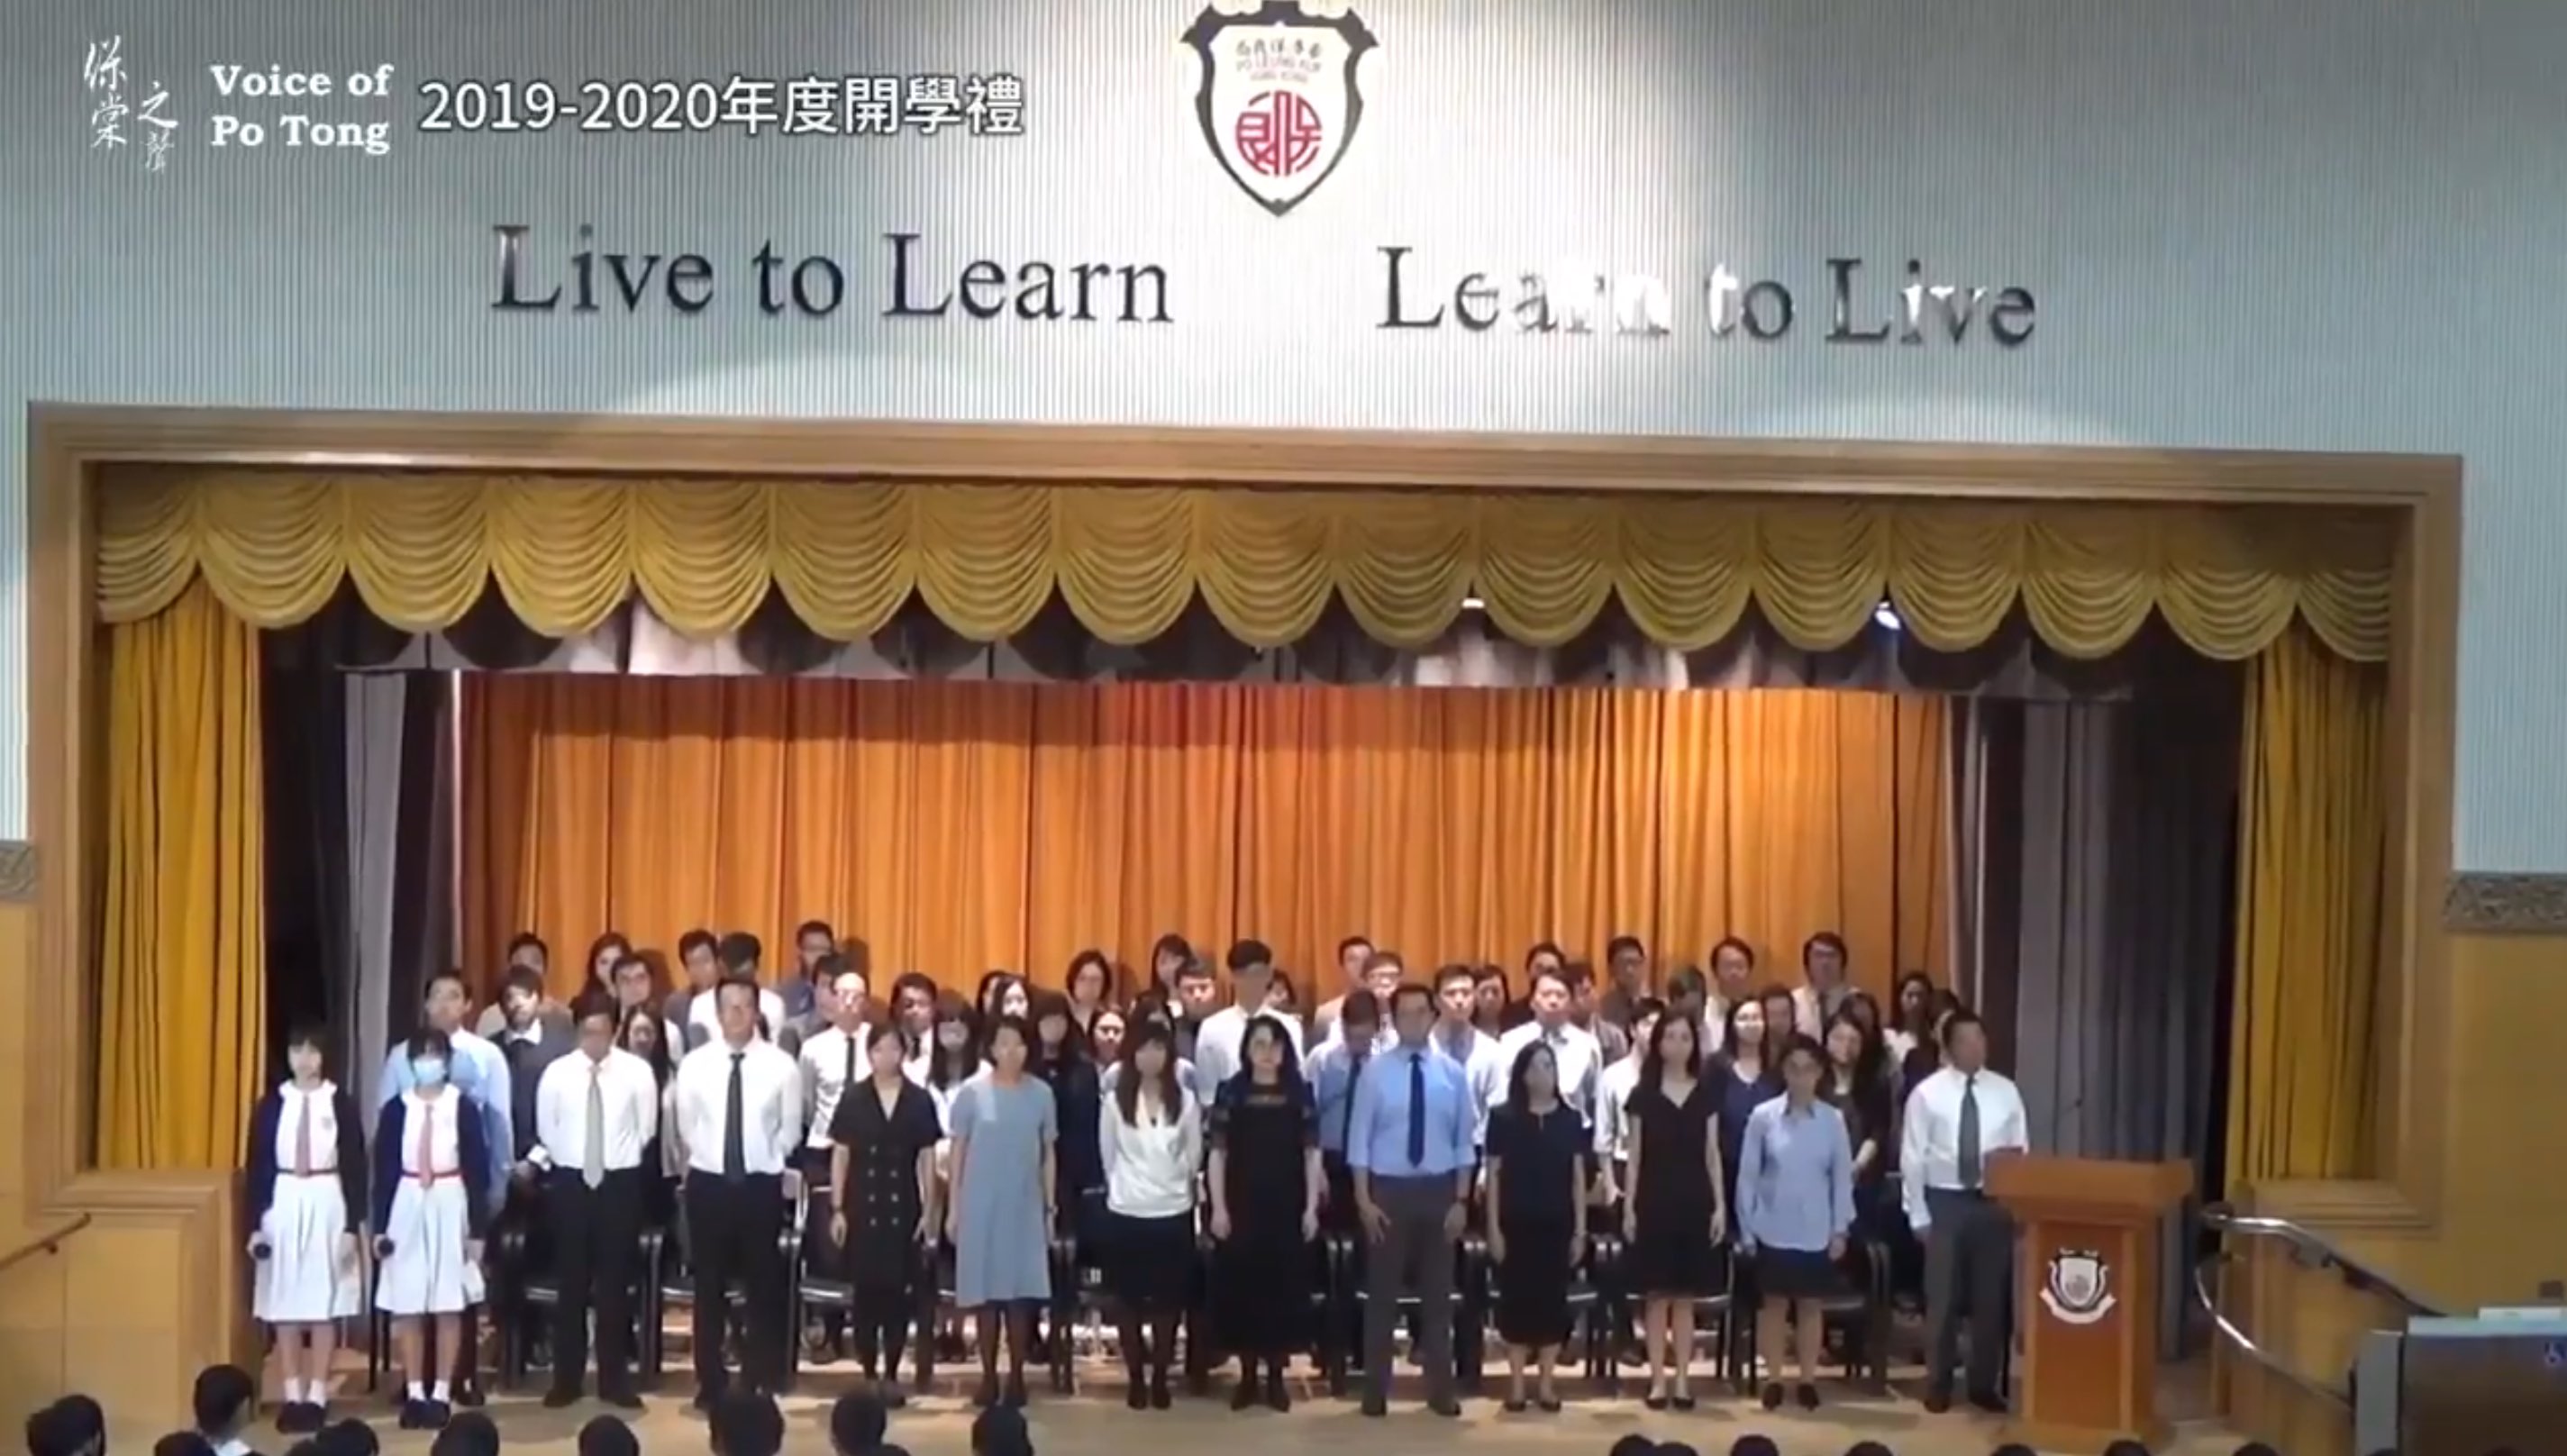 Stone-faced teachers stand awkwardly by as students drown out the Chinese national anthem with a rendition of ‘Do You Hear the People Sing’ at a school assembly on Monday. Screengrab via Twitter.